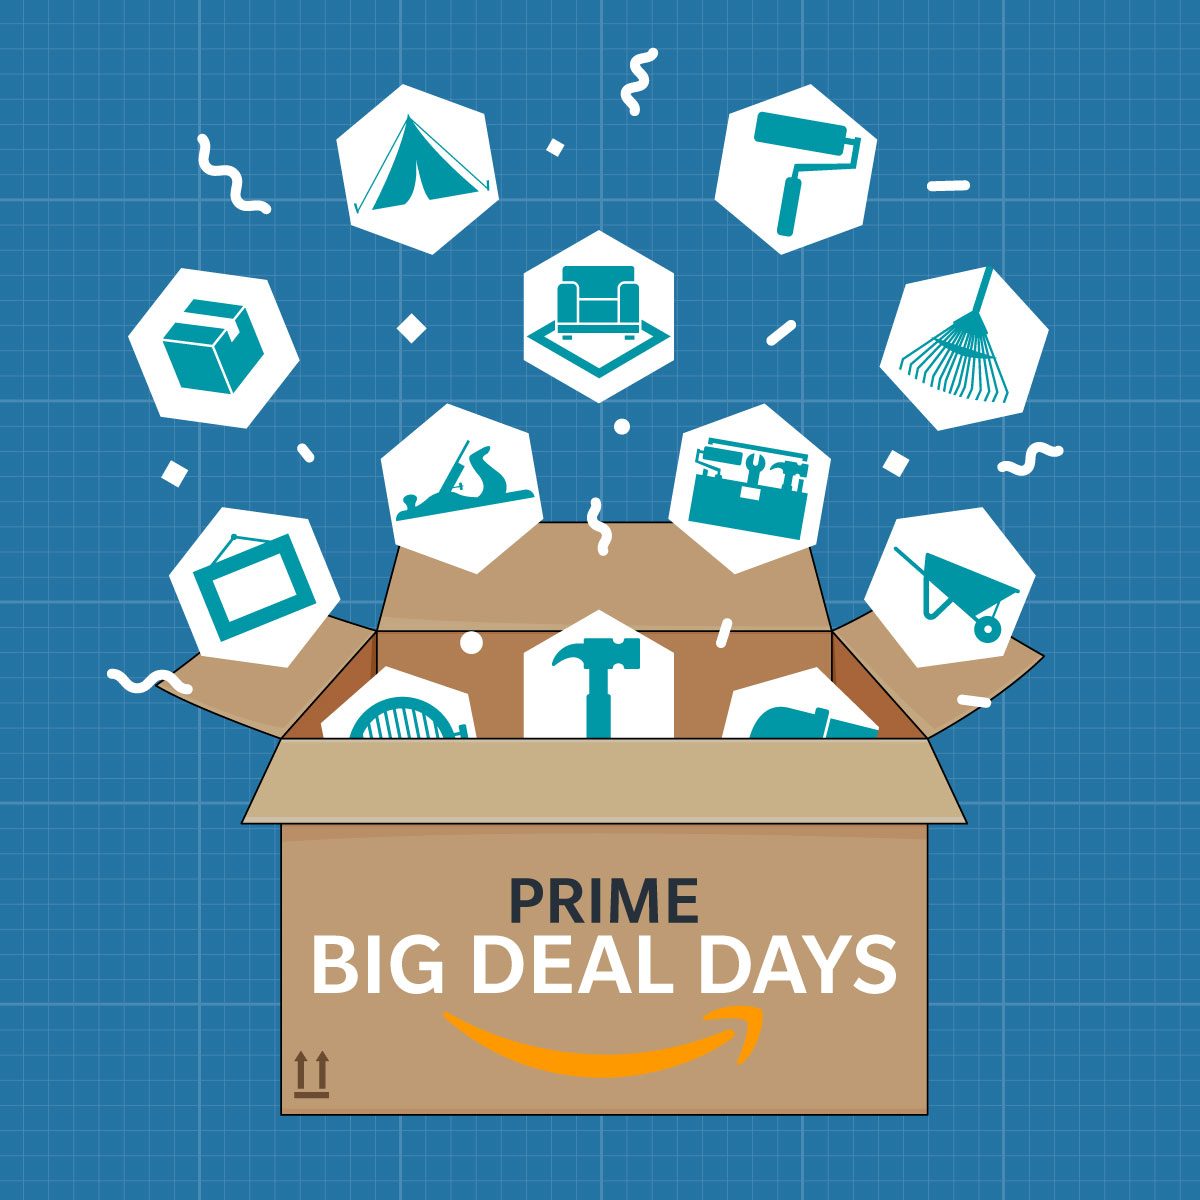 Prime Big Deals Days: Your Guide to the Best Deals